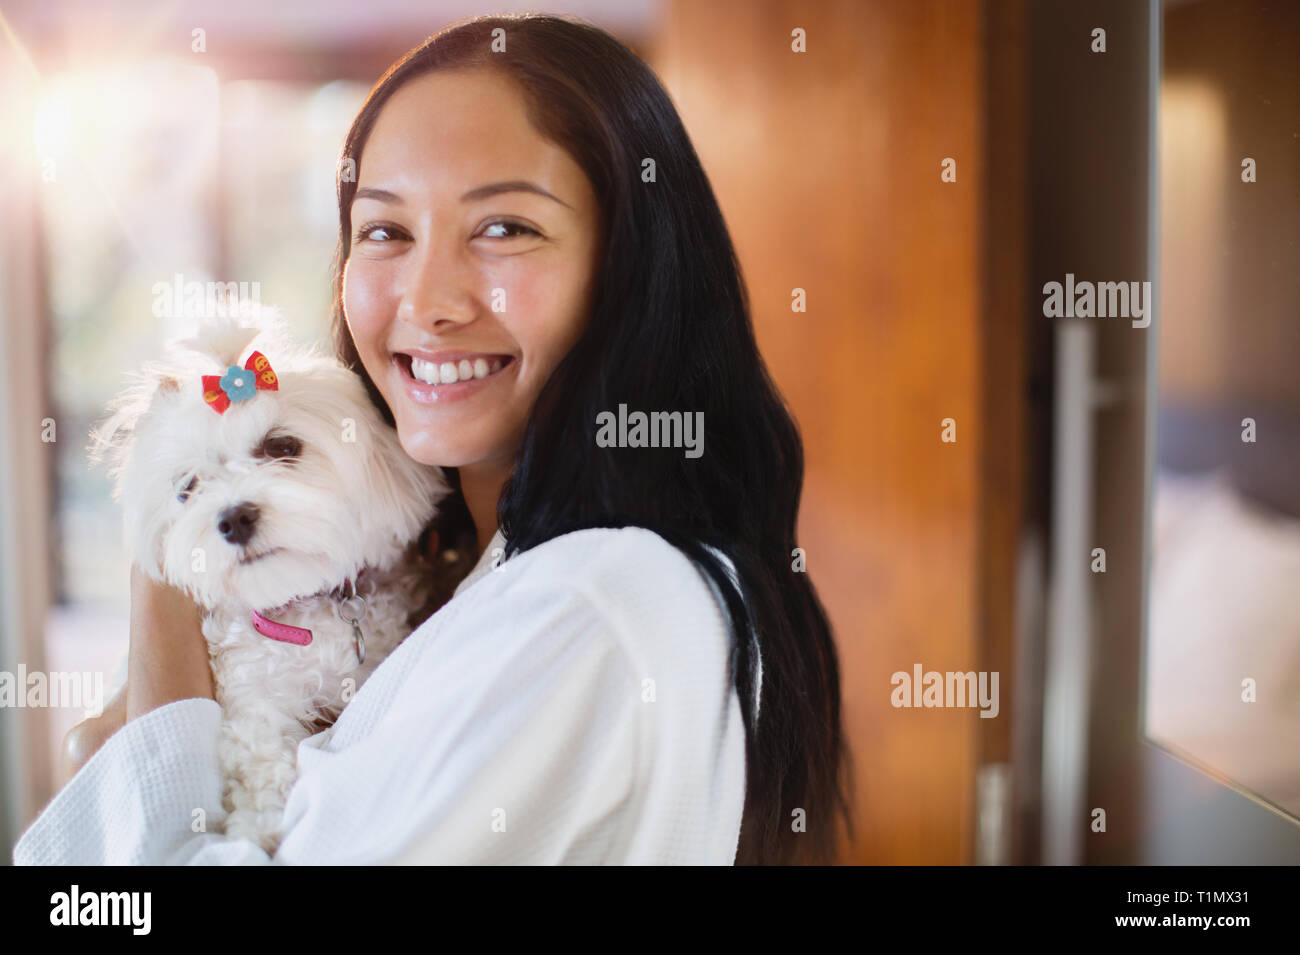 Portrait of happy young woman with dog Banque D'Images